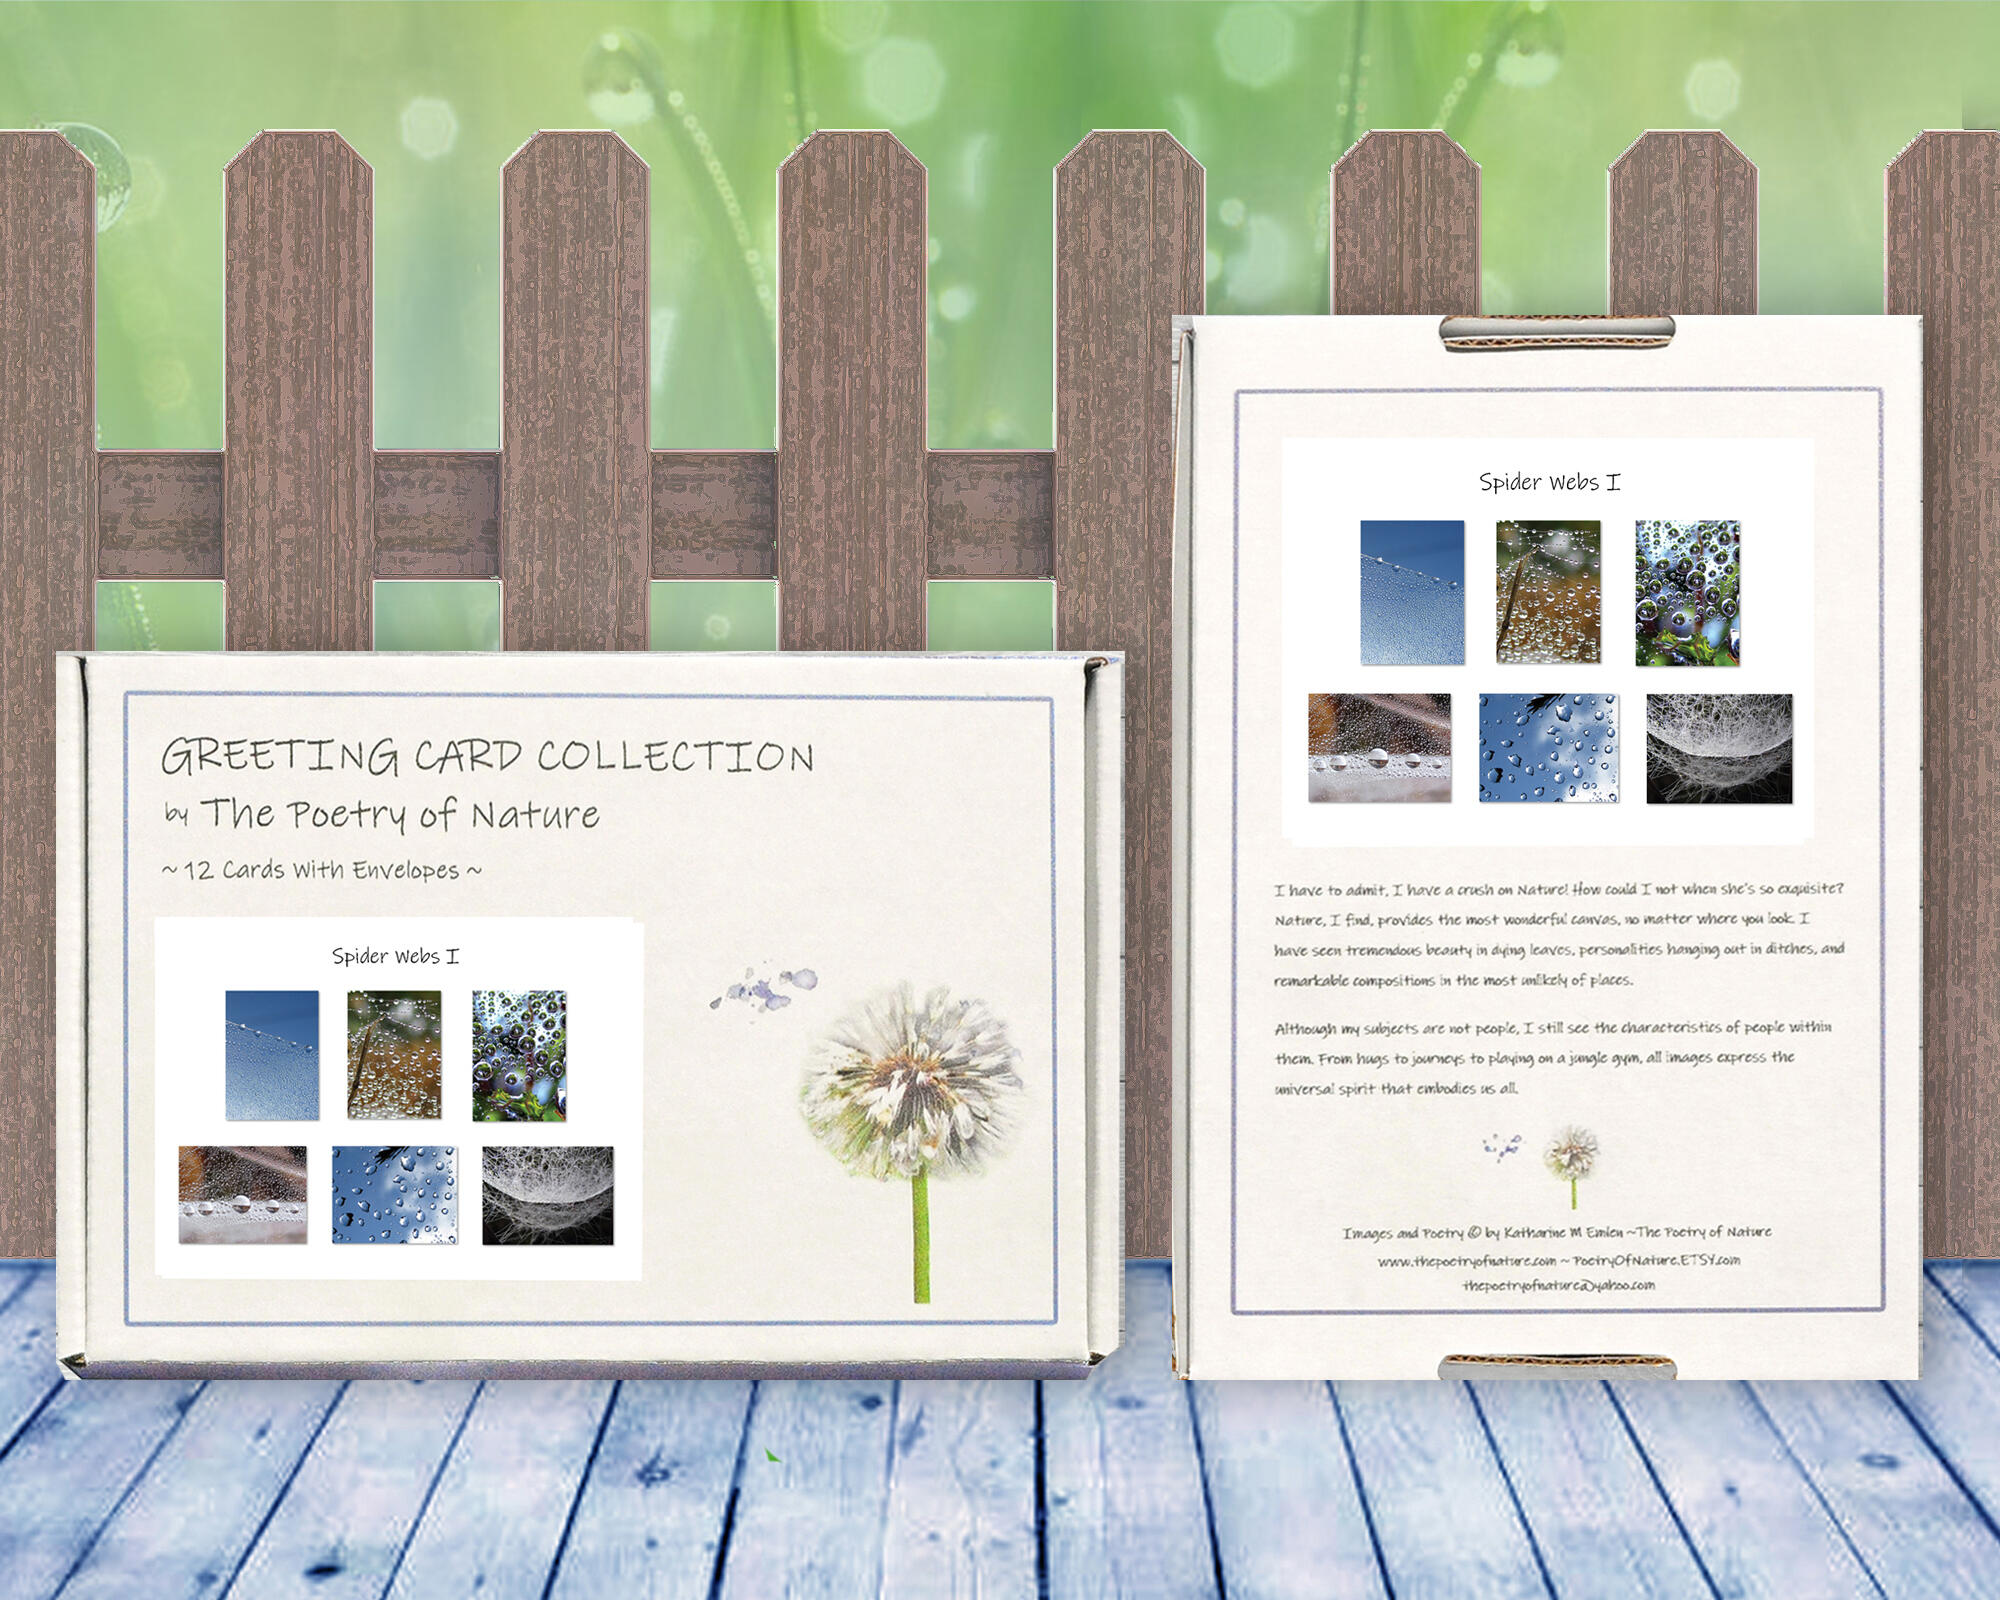 Spider Webs I - Greeting Card Collection by The Poetry of Nature